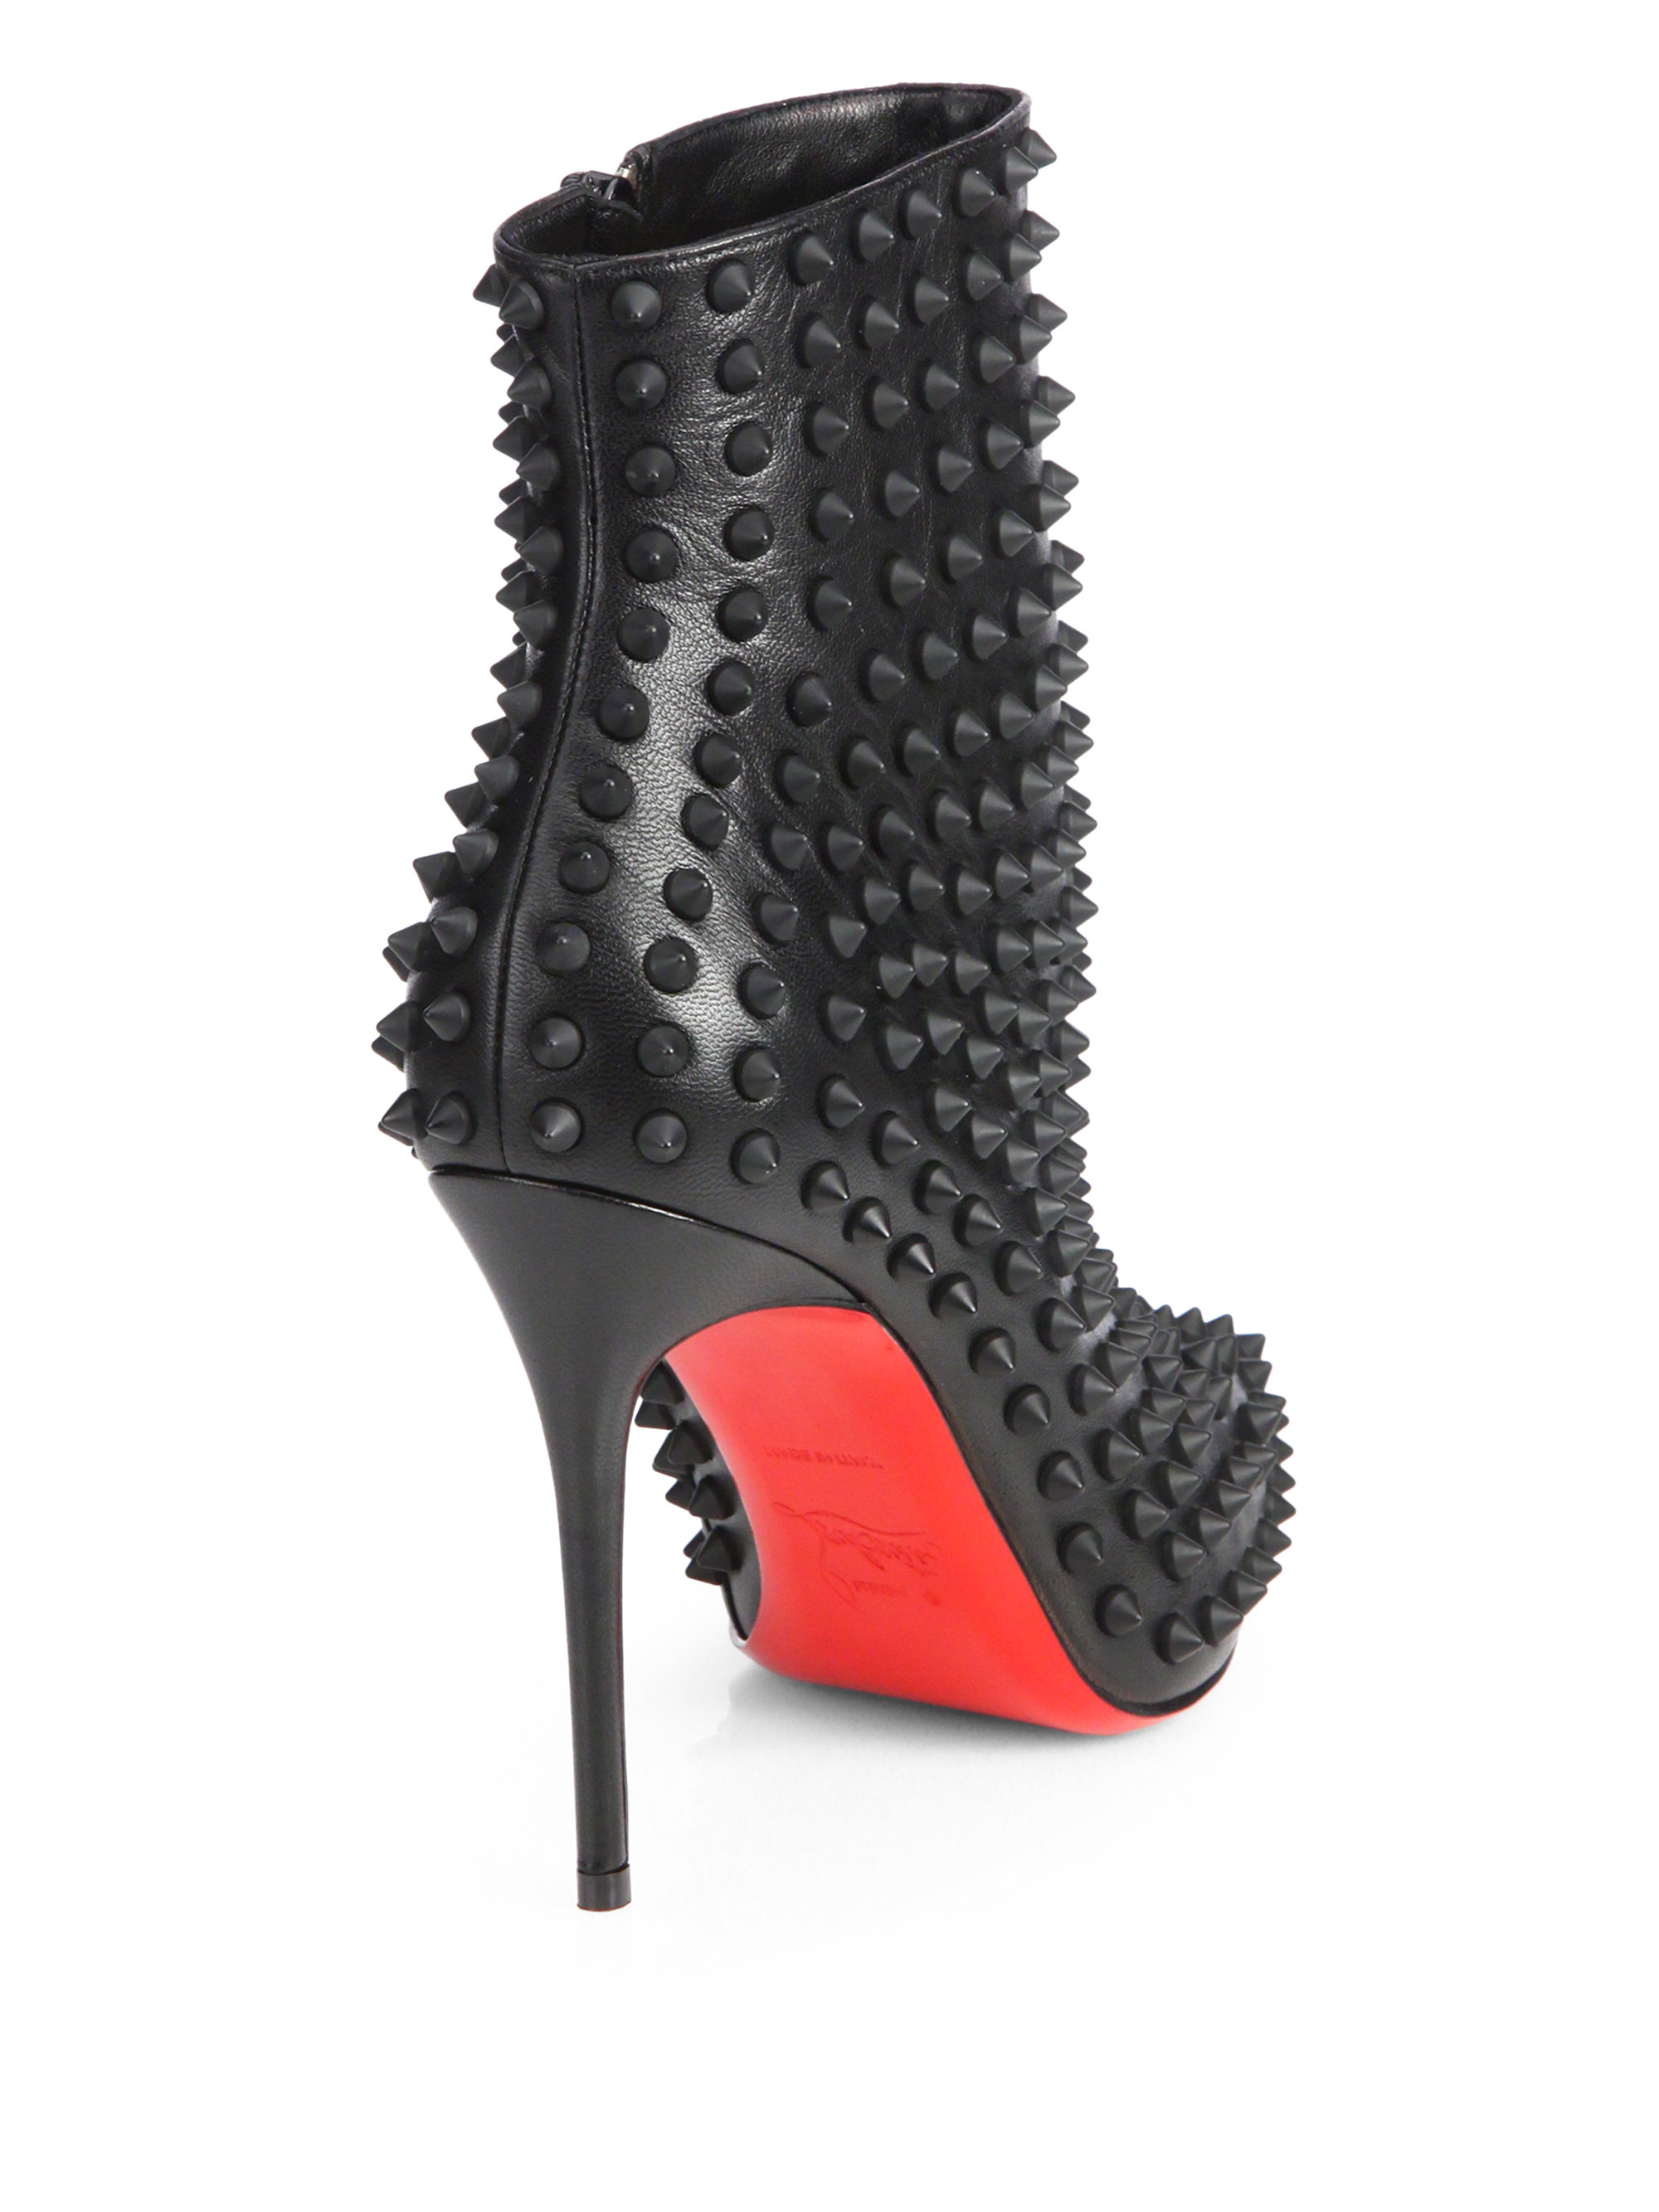 Christian Louboutin Snakilta Spiked Leather Ankle Boots in Black - Lyst